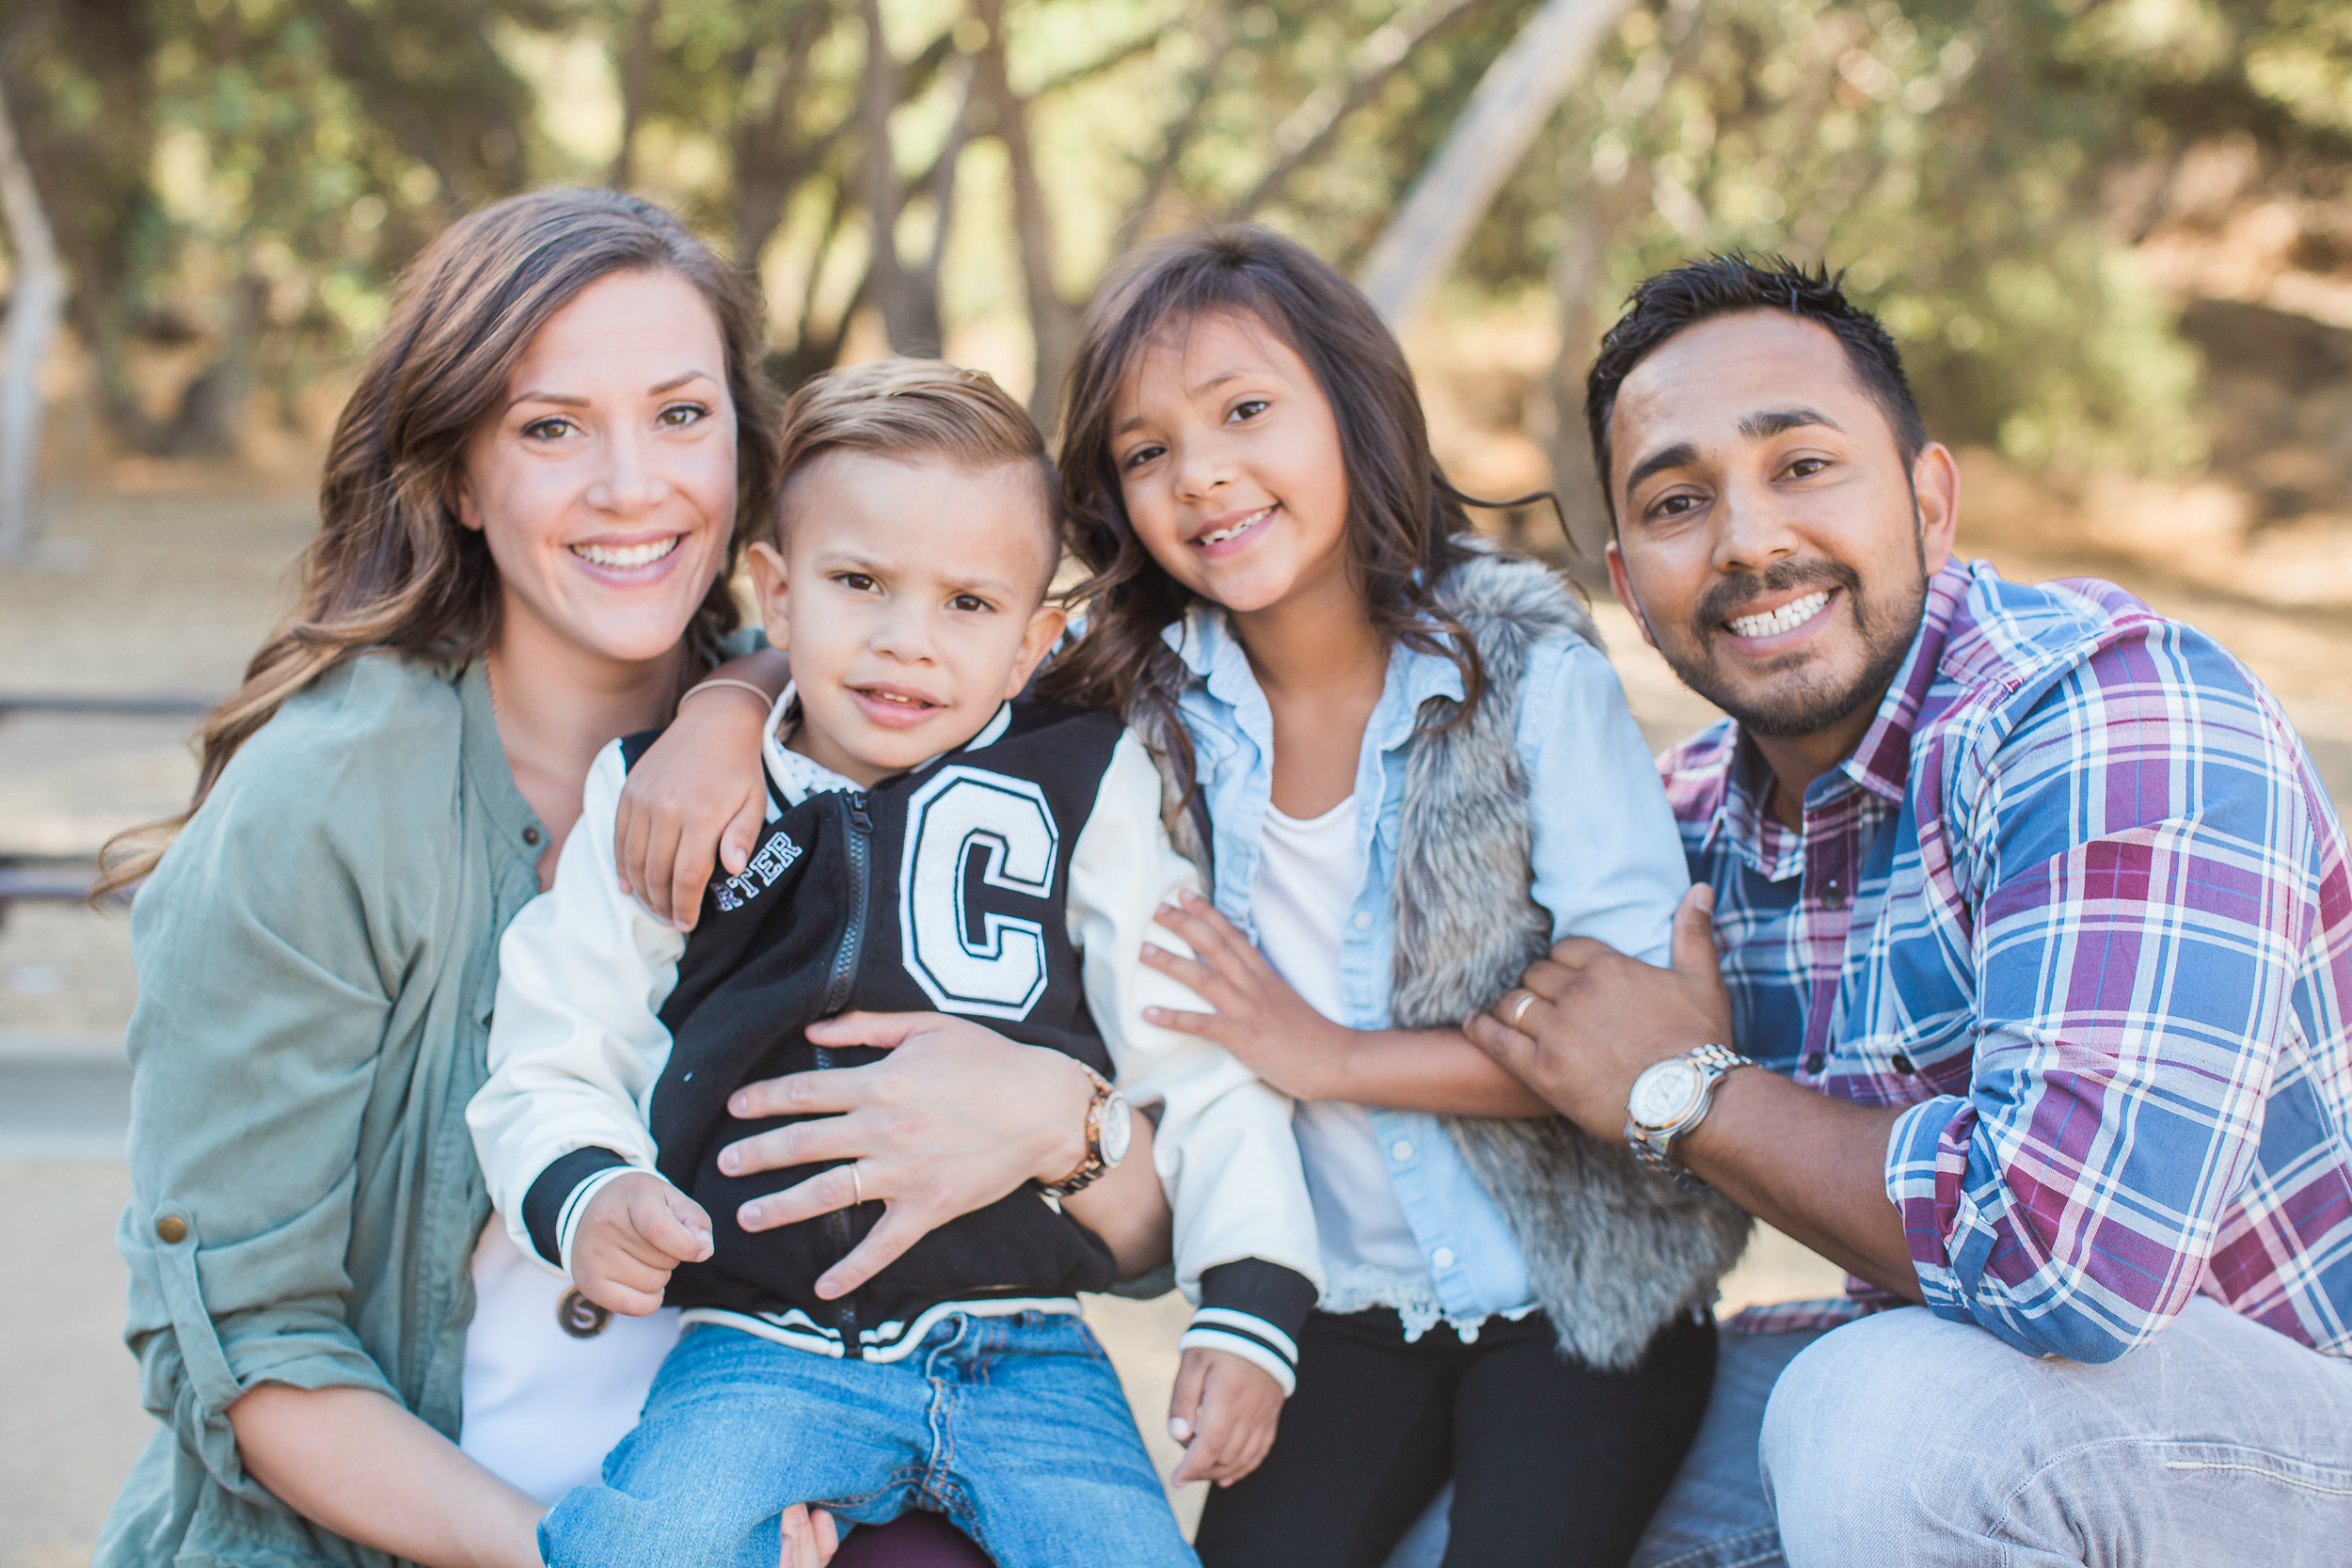 PHOTO: Jennifer and Samir Sarkar seen in an undated family photo with their children, Sophia, 8, and Carter, 6.